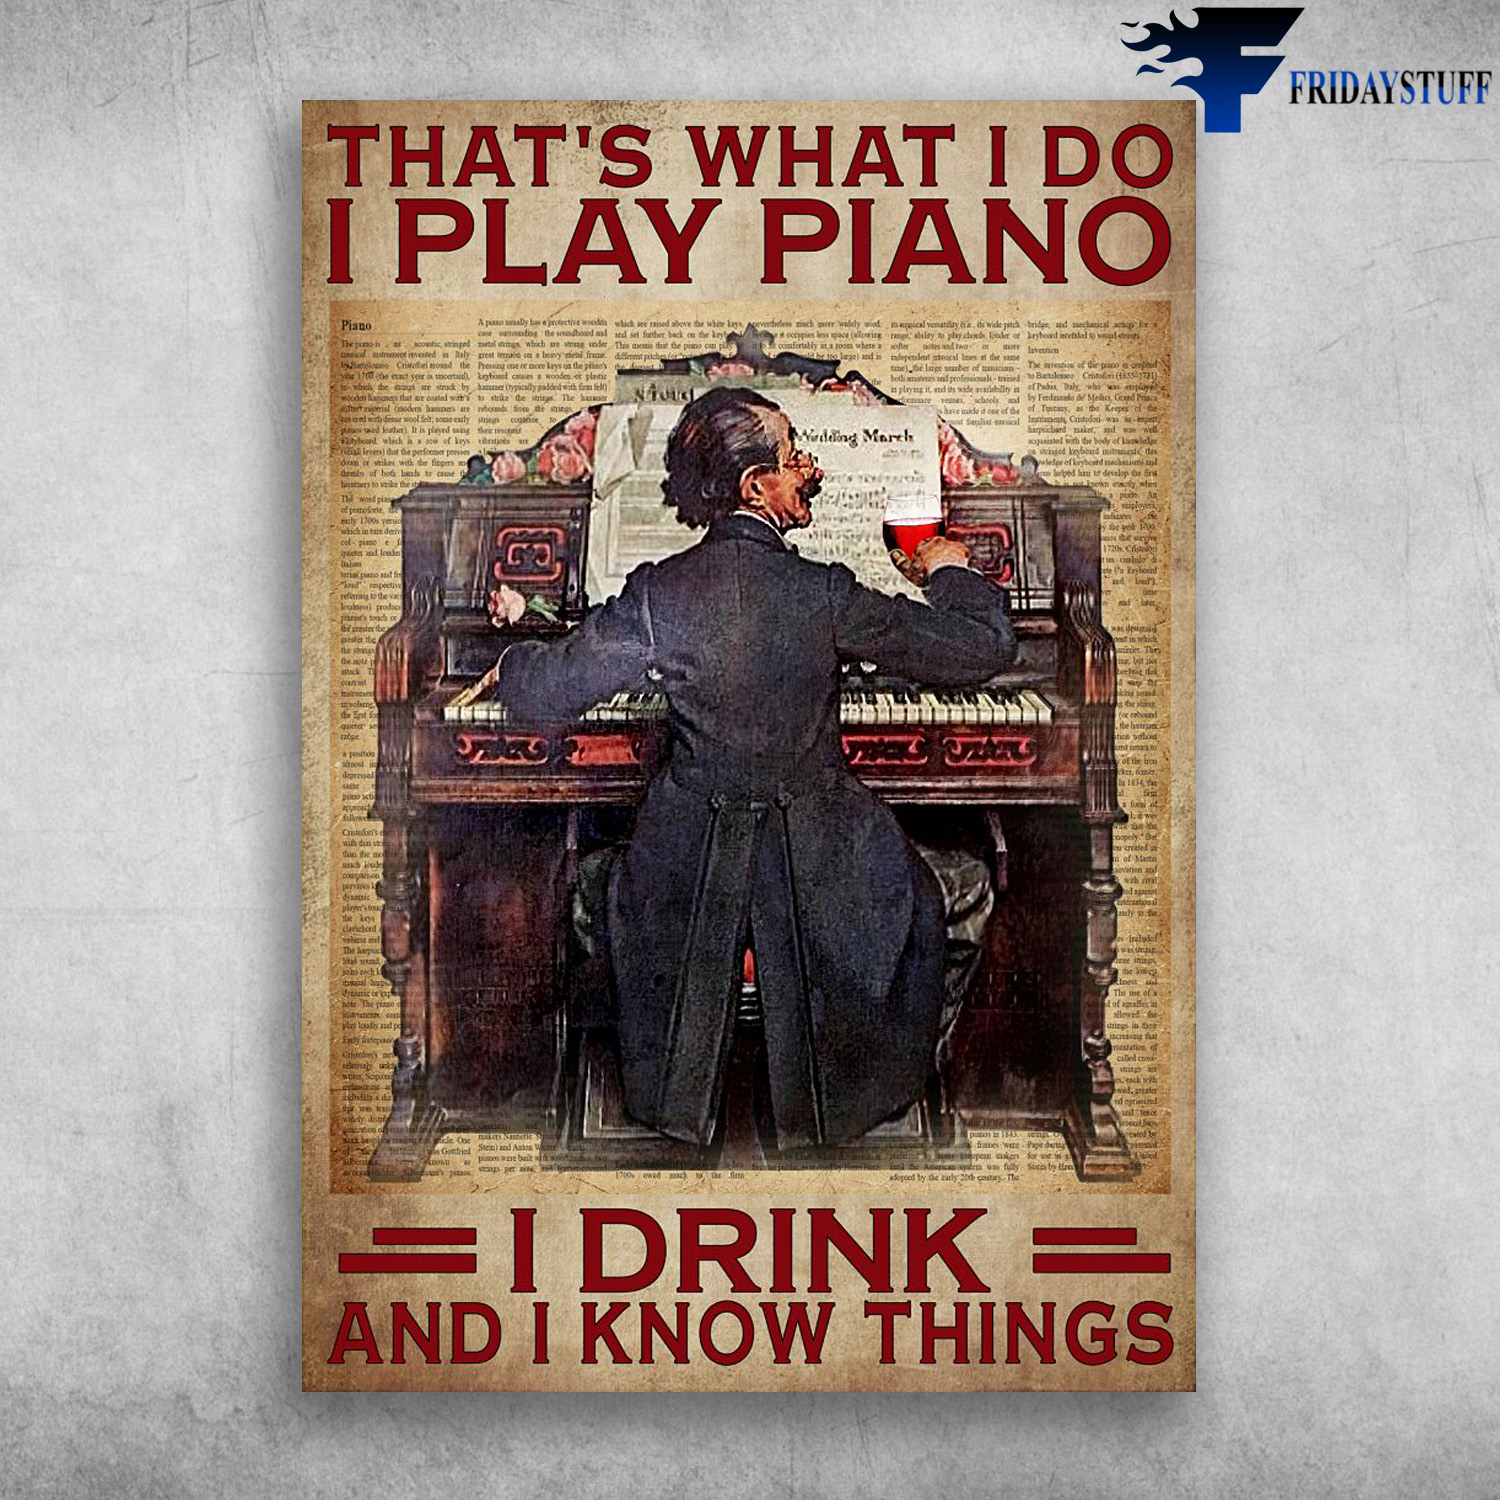 Old Man Plays Piano, Drink Wine - That's What I Do, I Play Piano, I Drink, And I Know Things